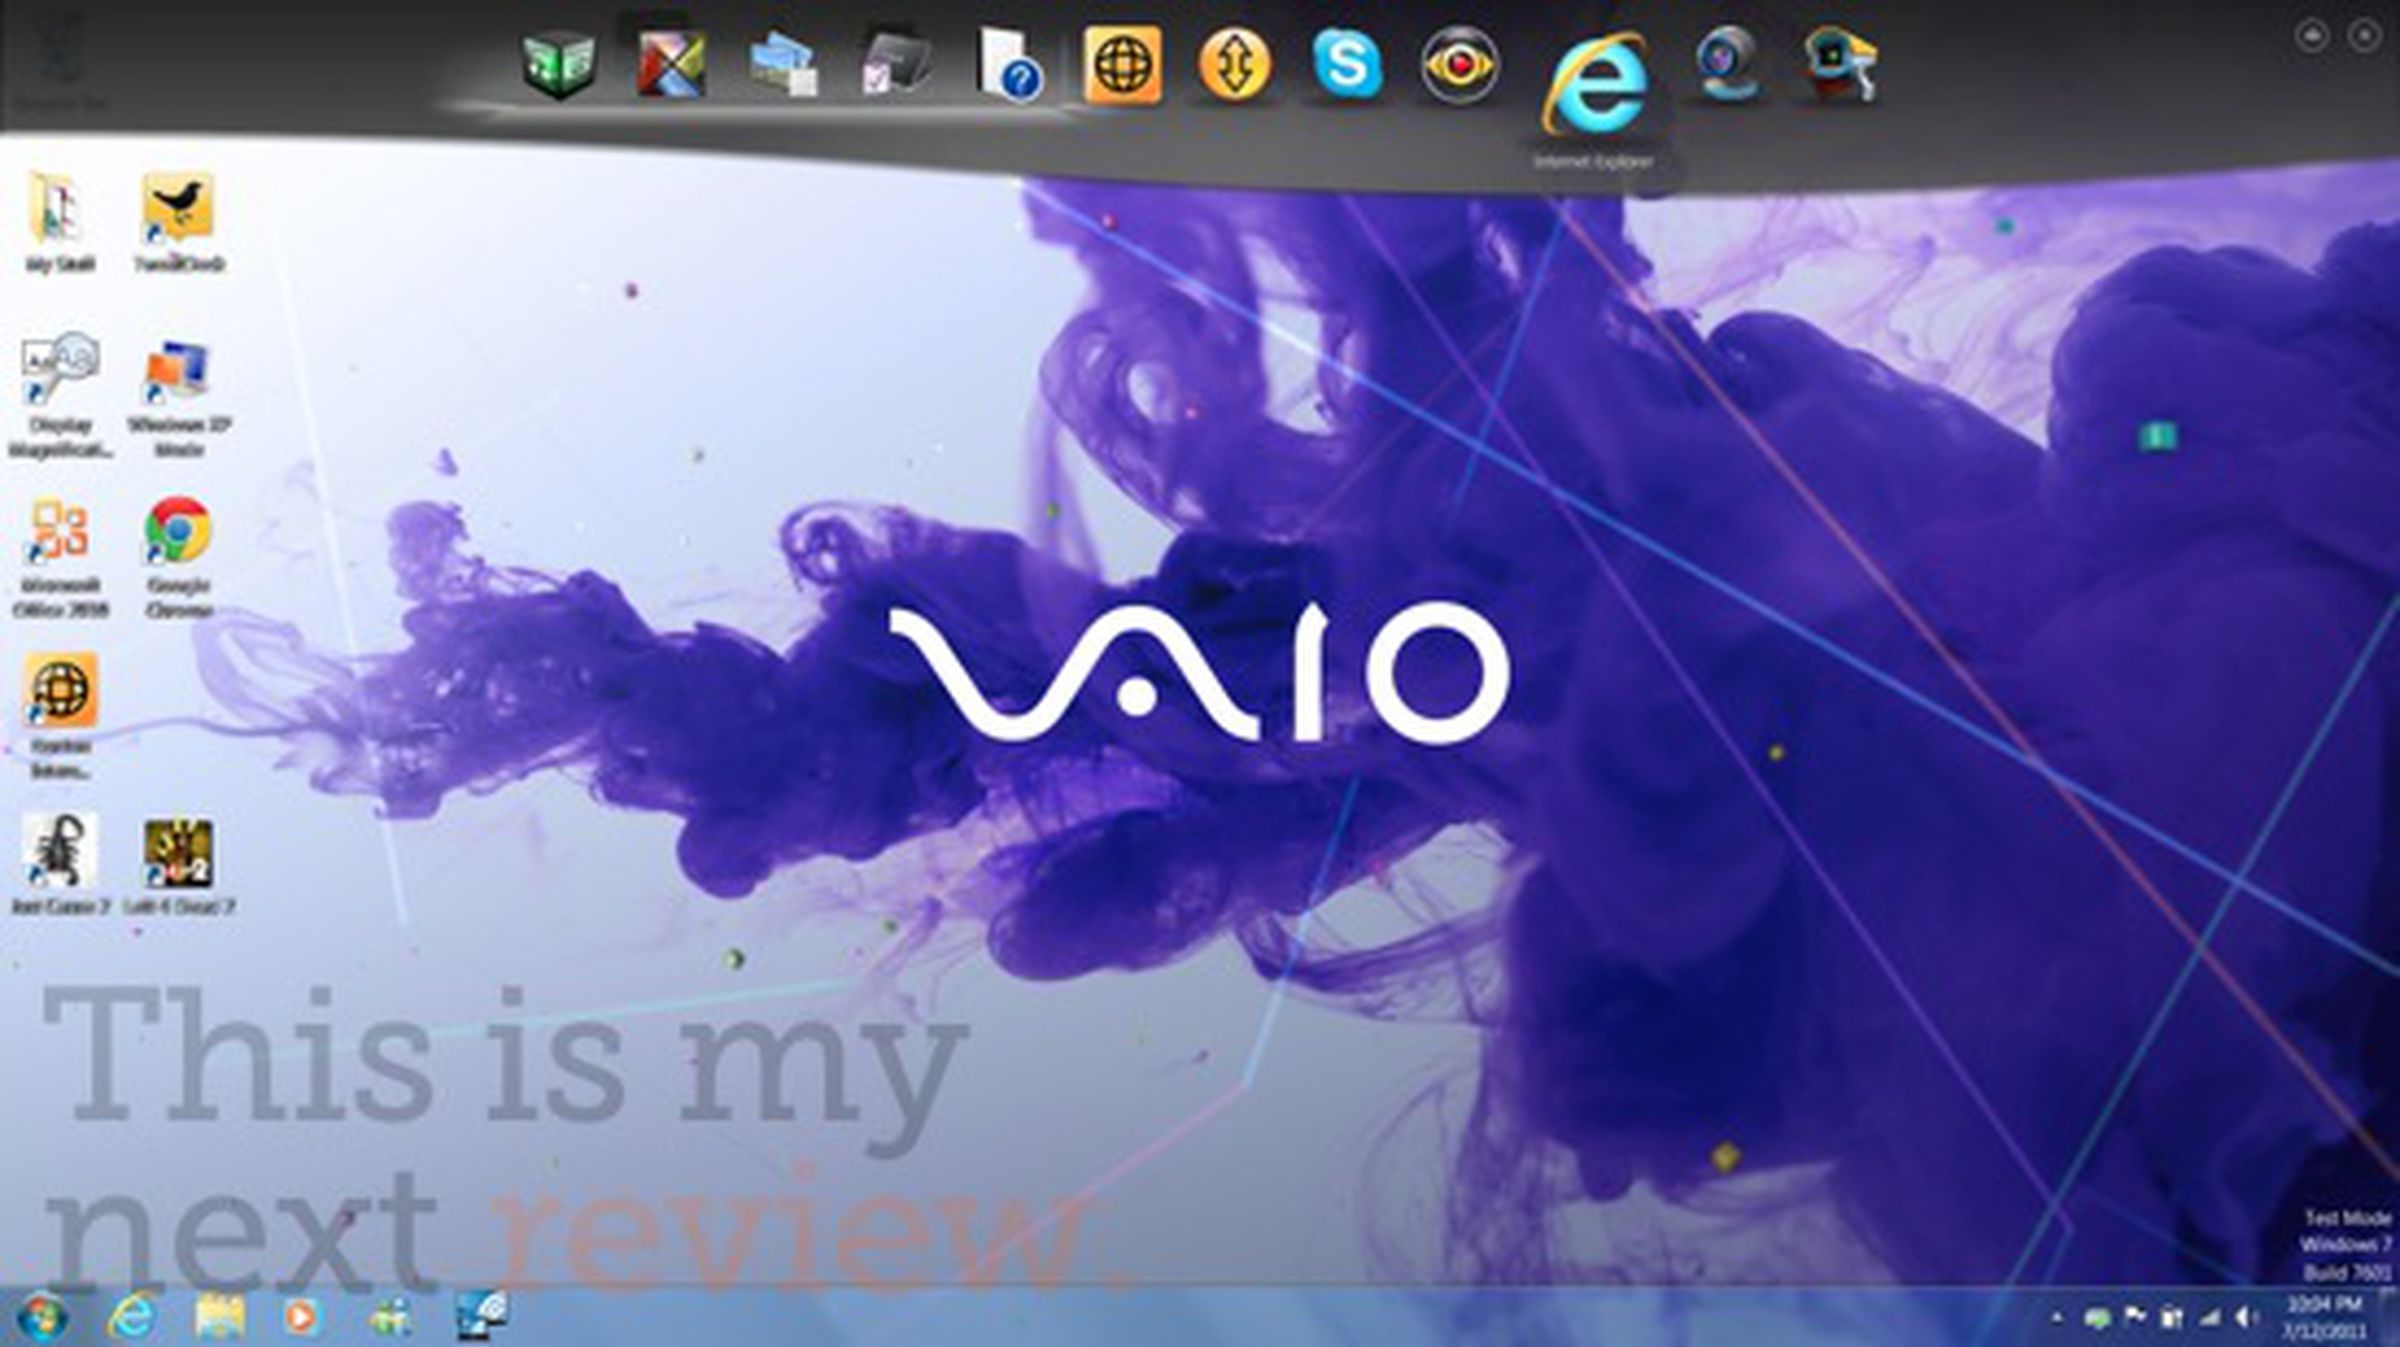 Sony VAIO Z Series (VPCZ216GX/L) review pictures